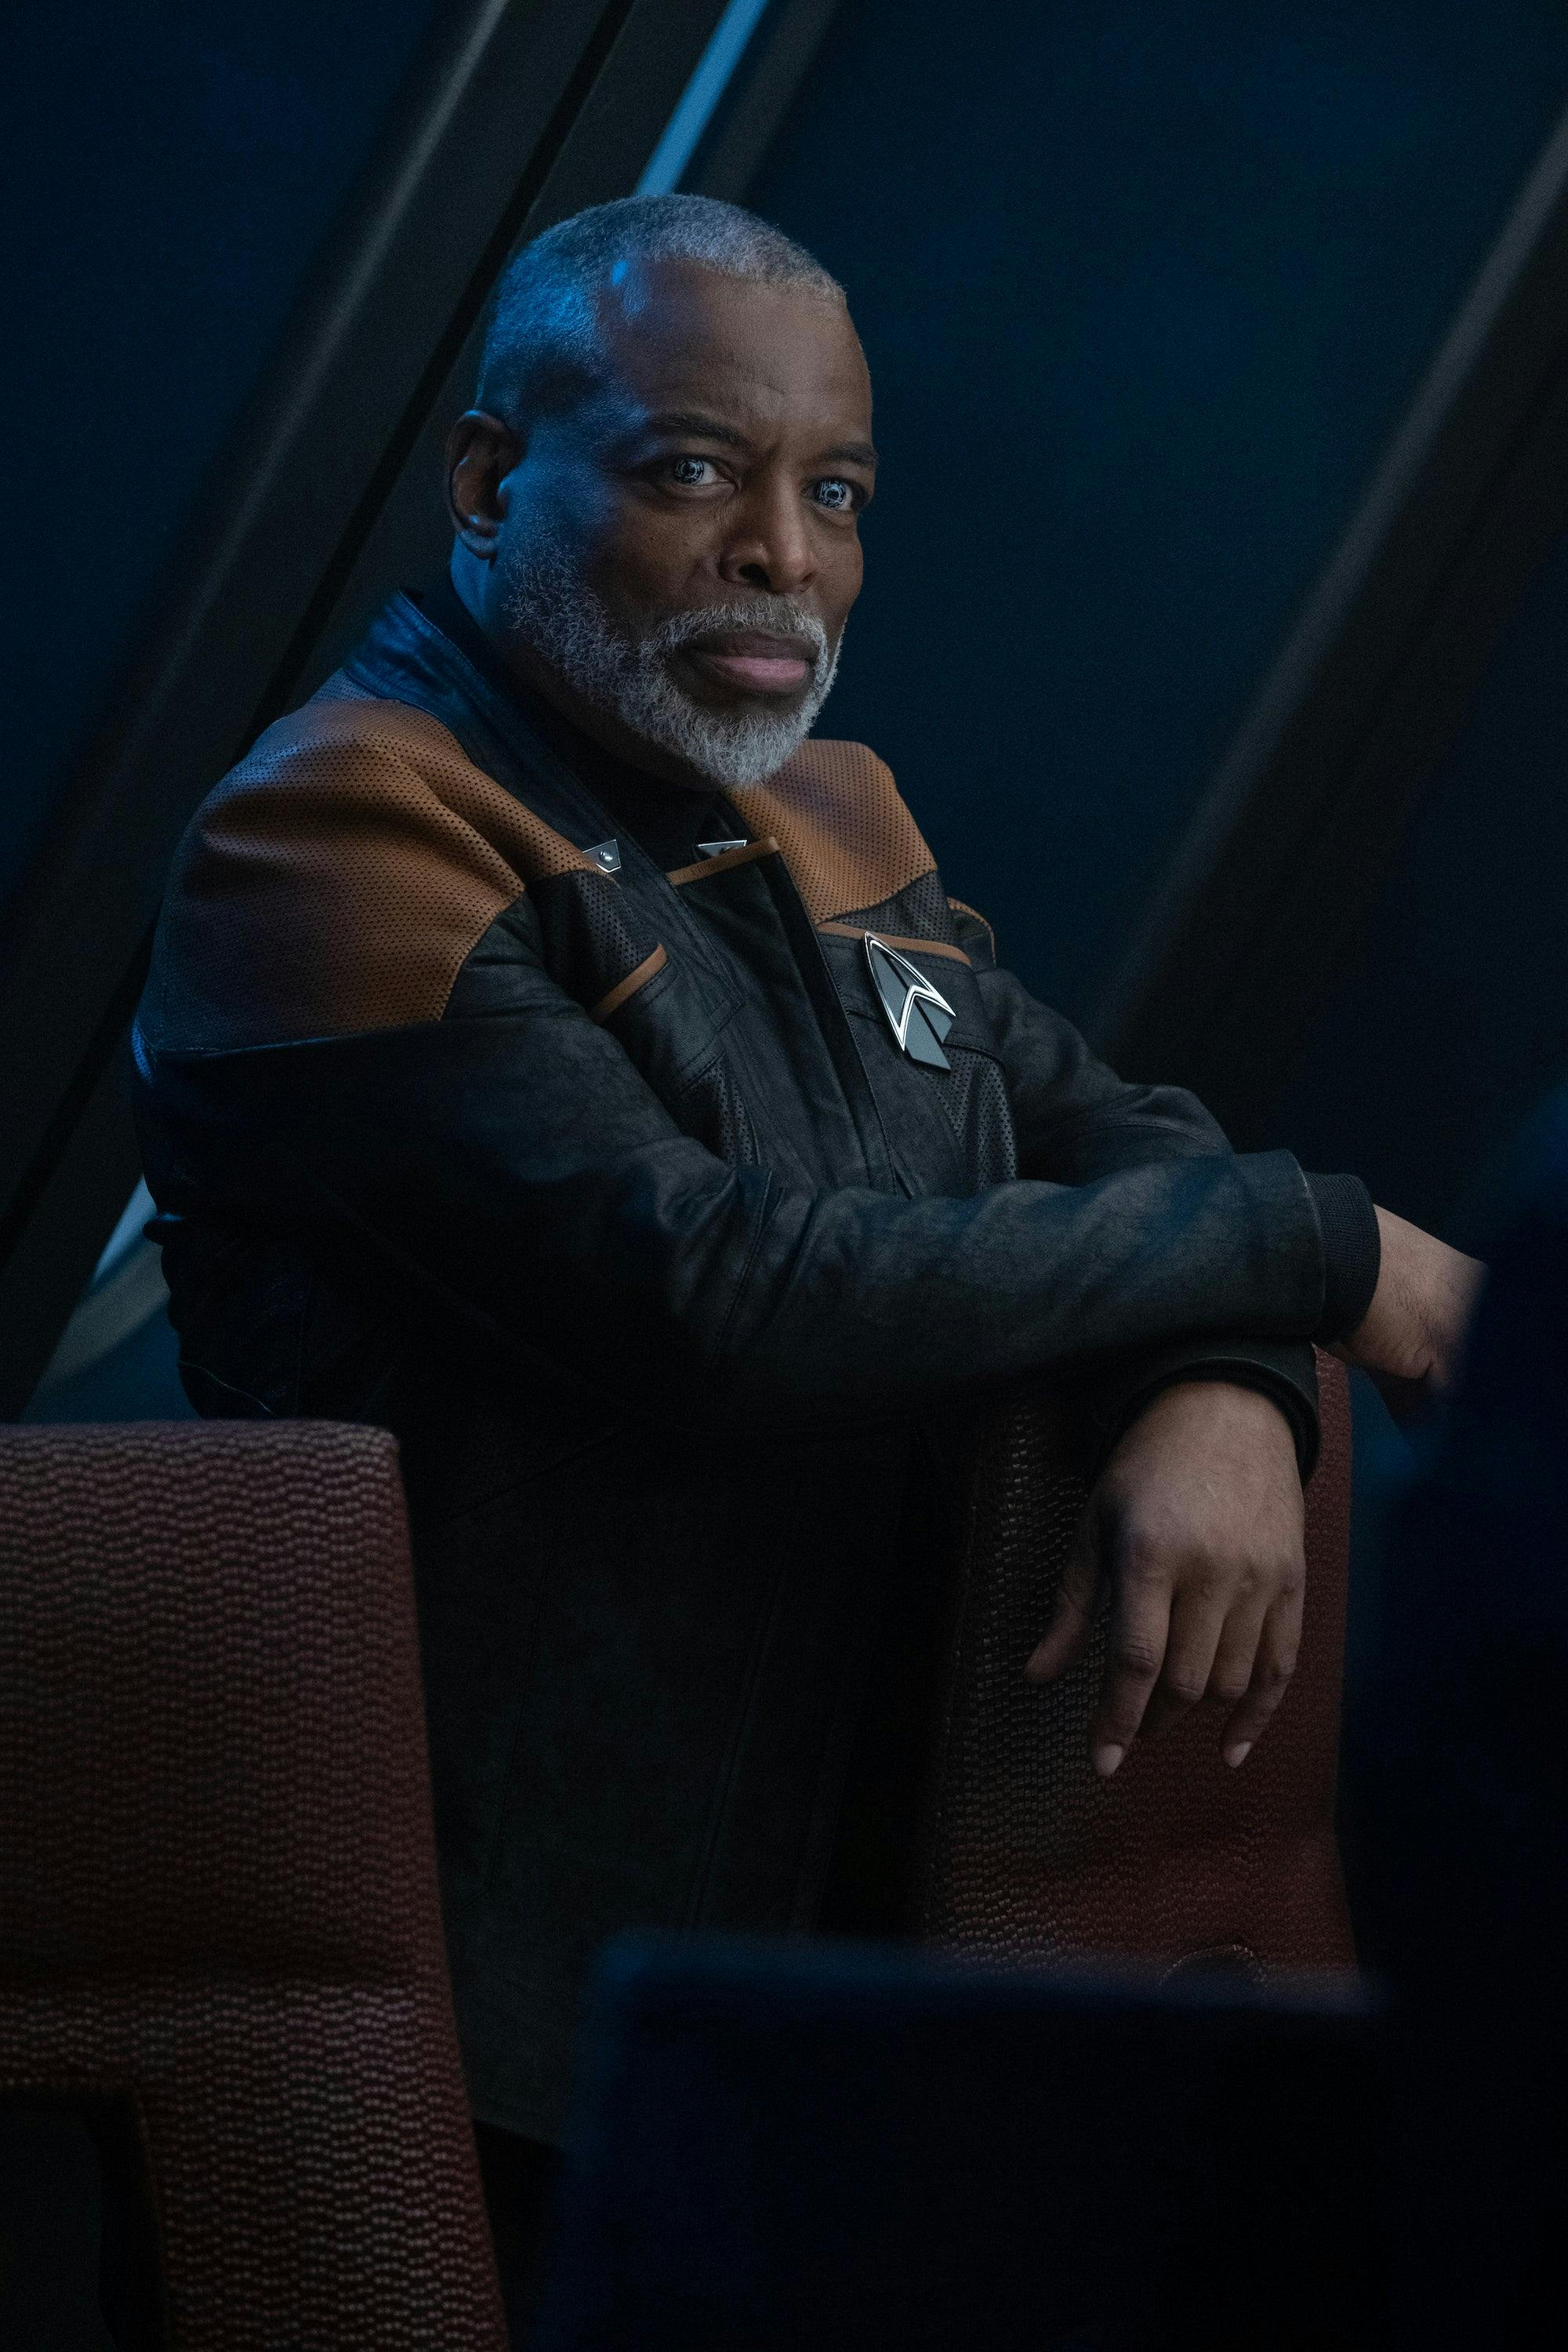 Geordi La Forge sits at the table in the Titan's Observation Lounge with his right arm crossed over his left